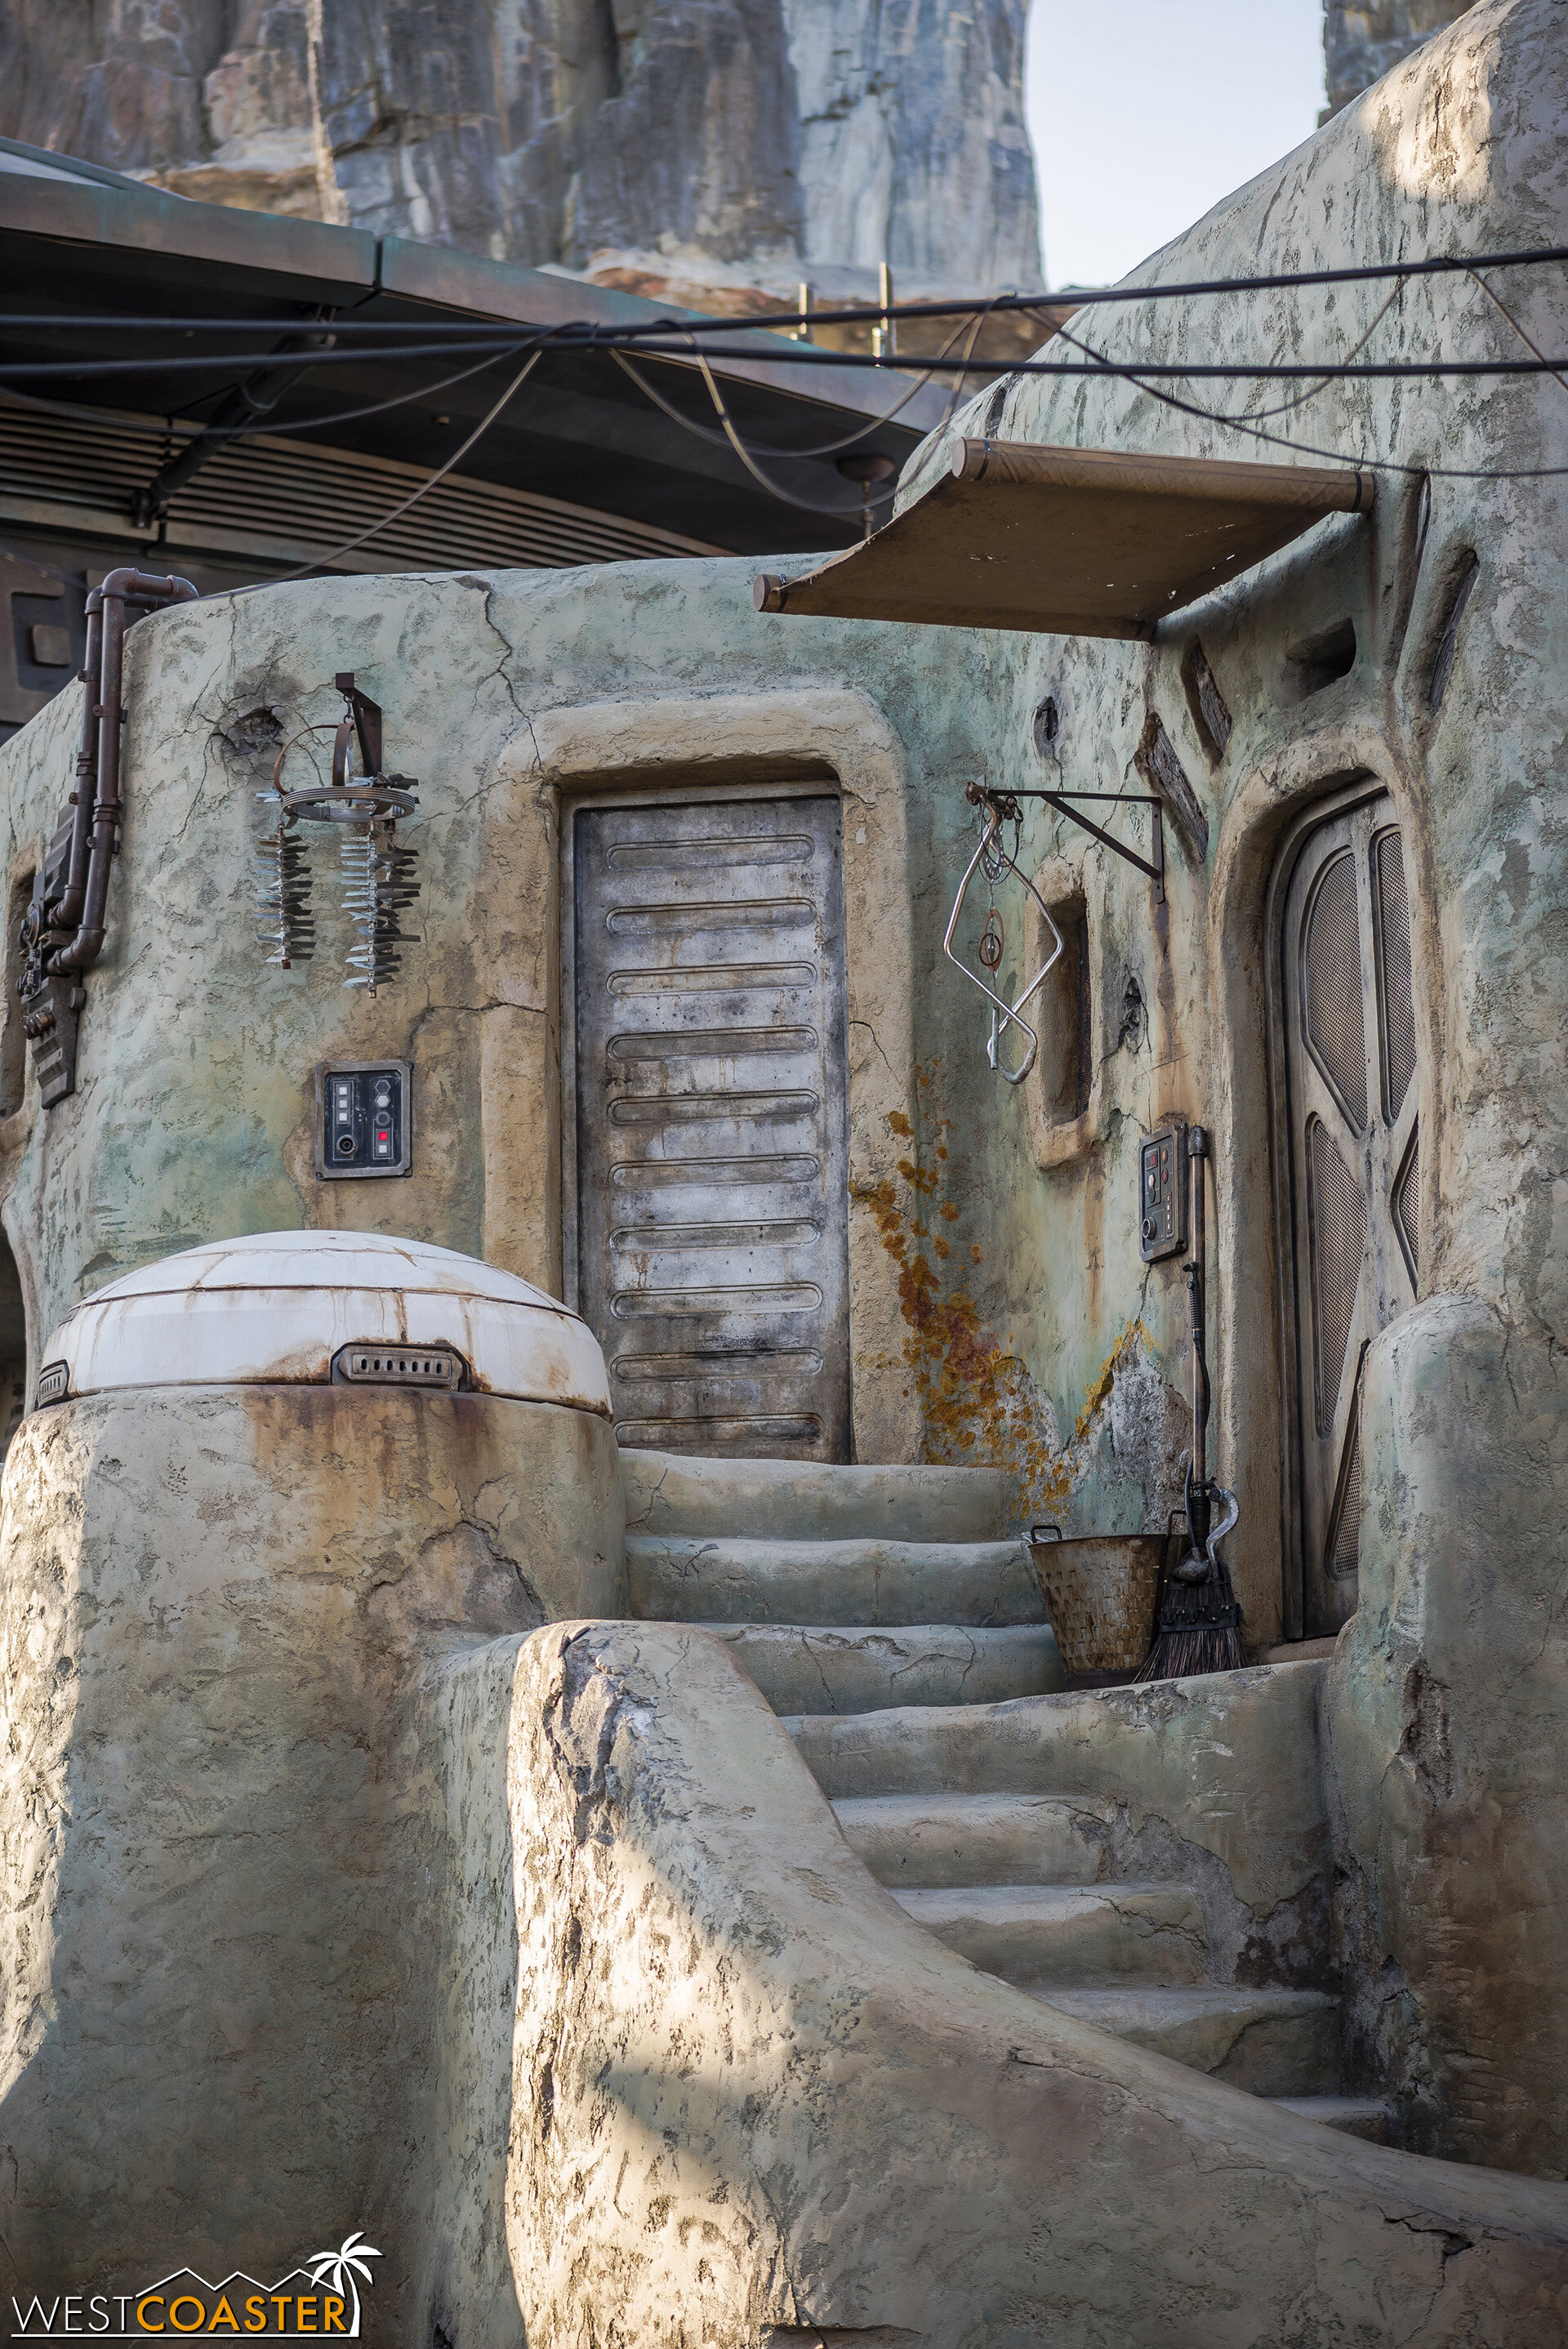  There are doors for function and for show, and the rugged look feels a bit Tatooine-ish! 